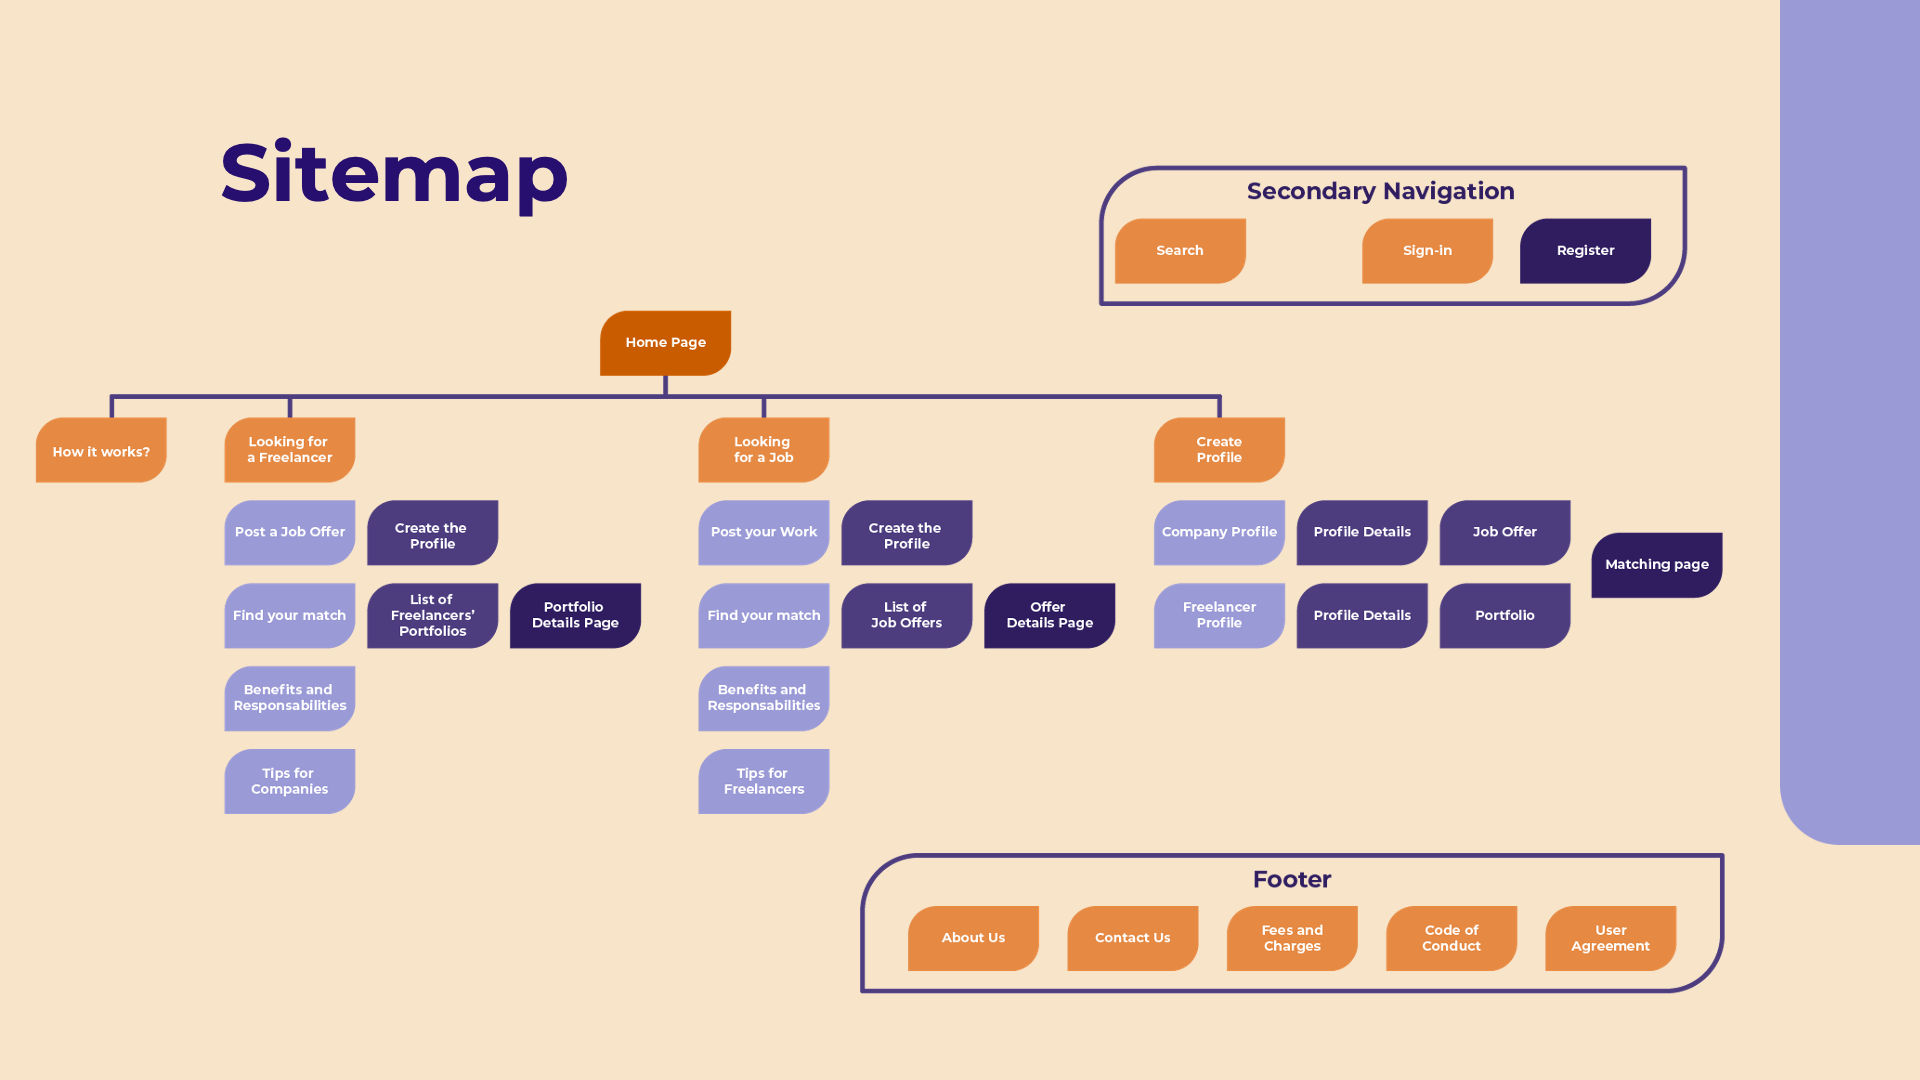 Sitemap of TalentHub